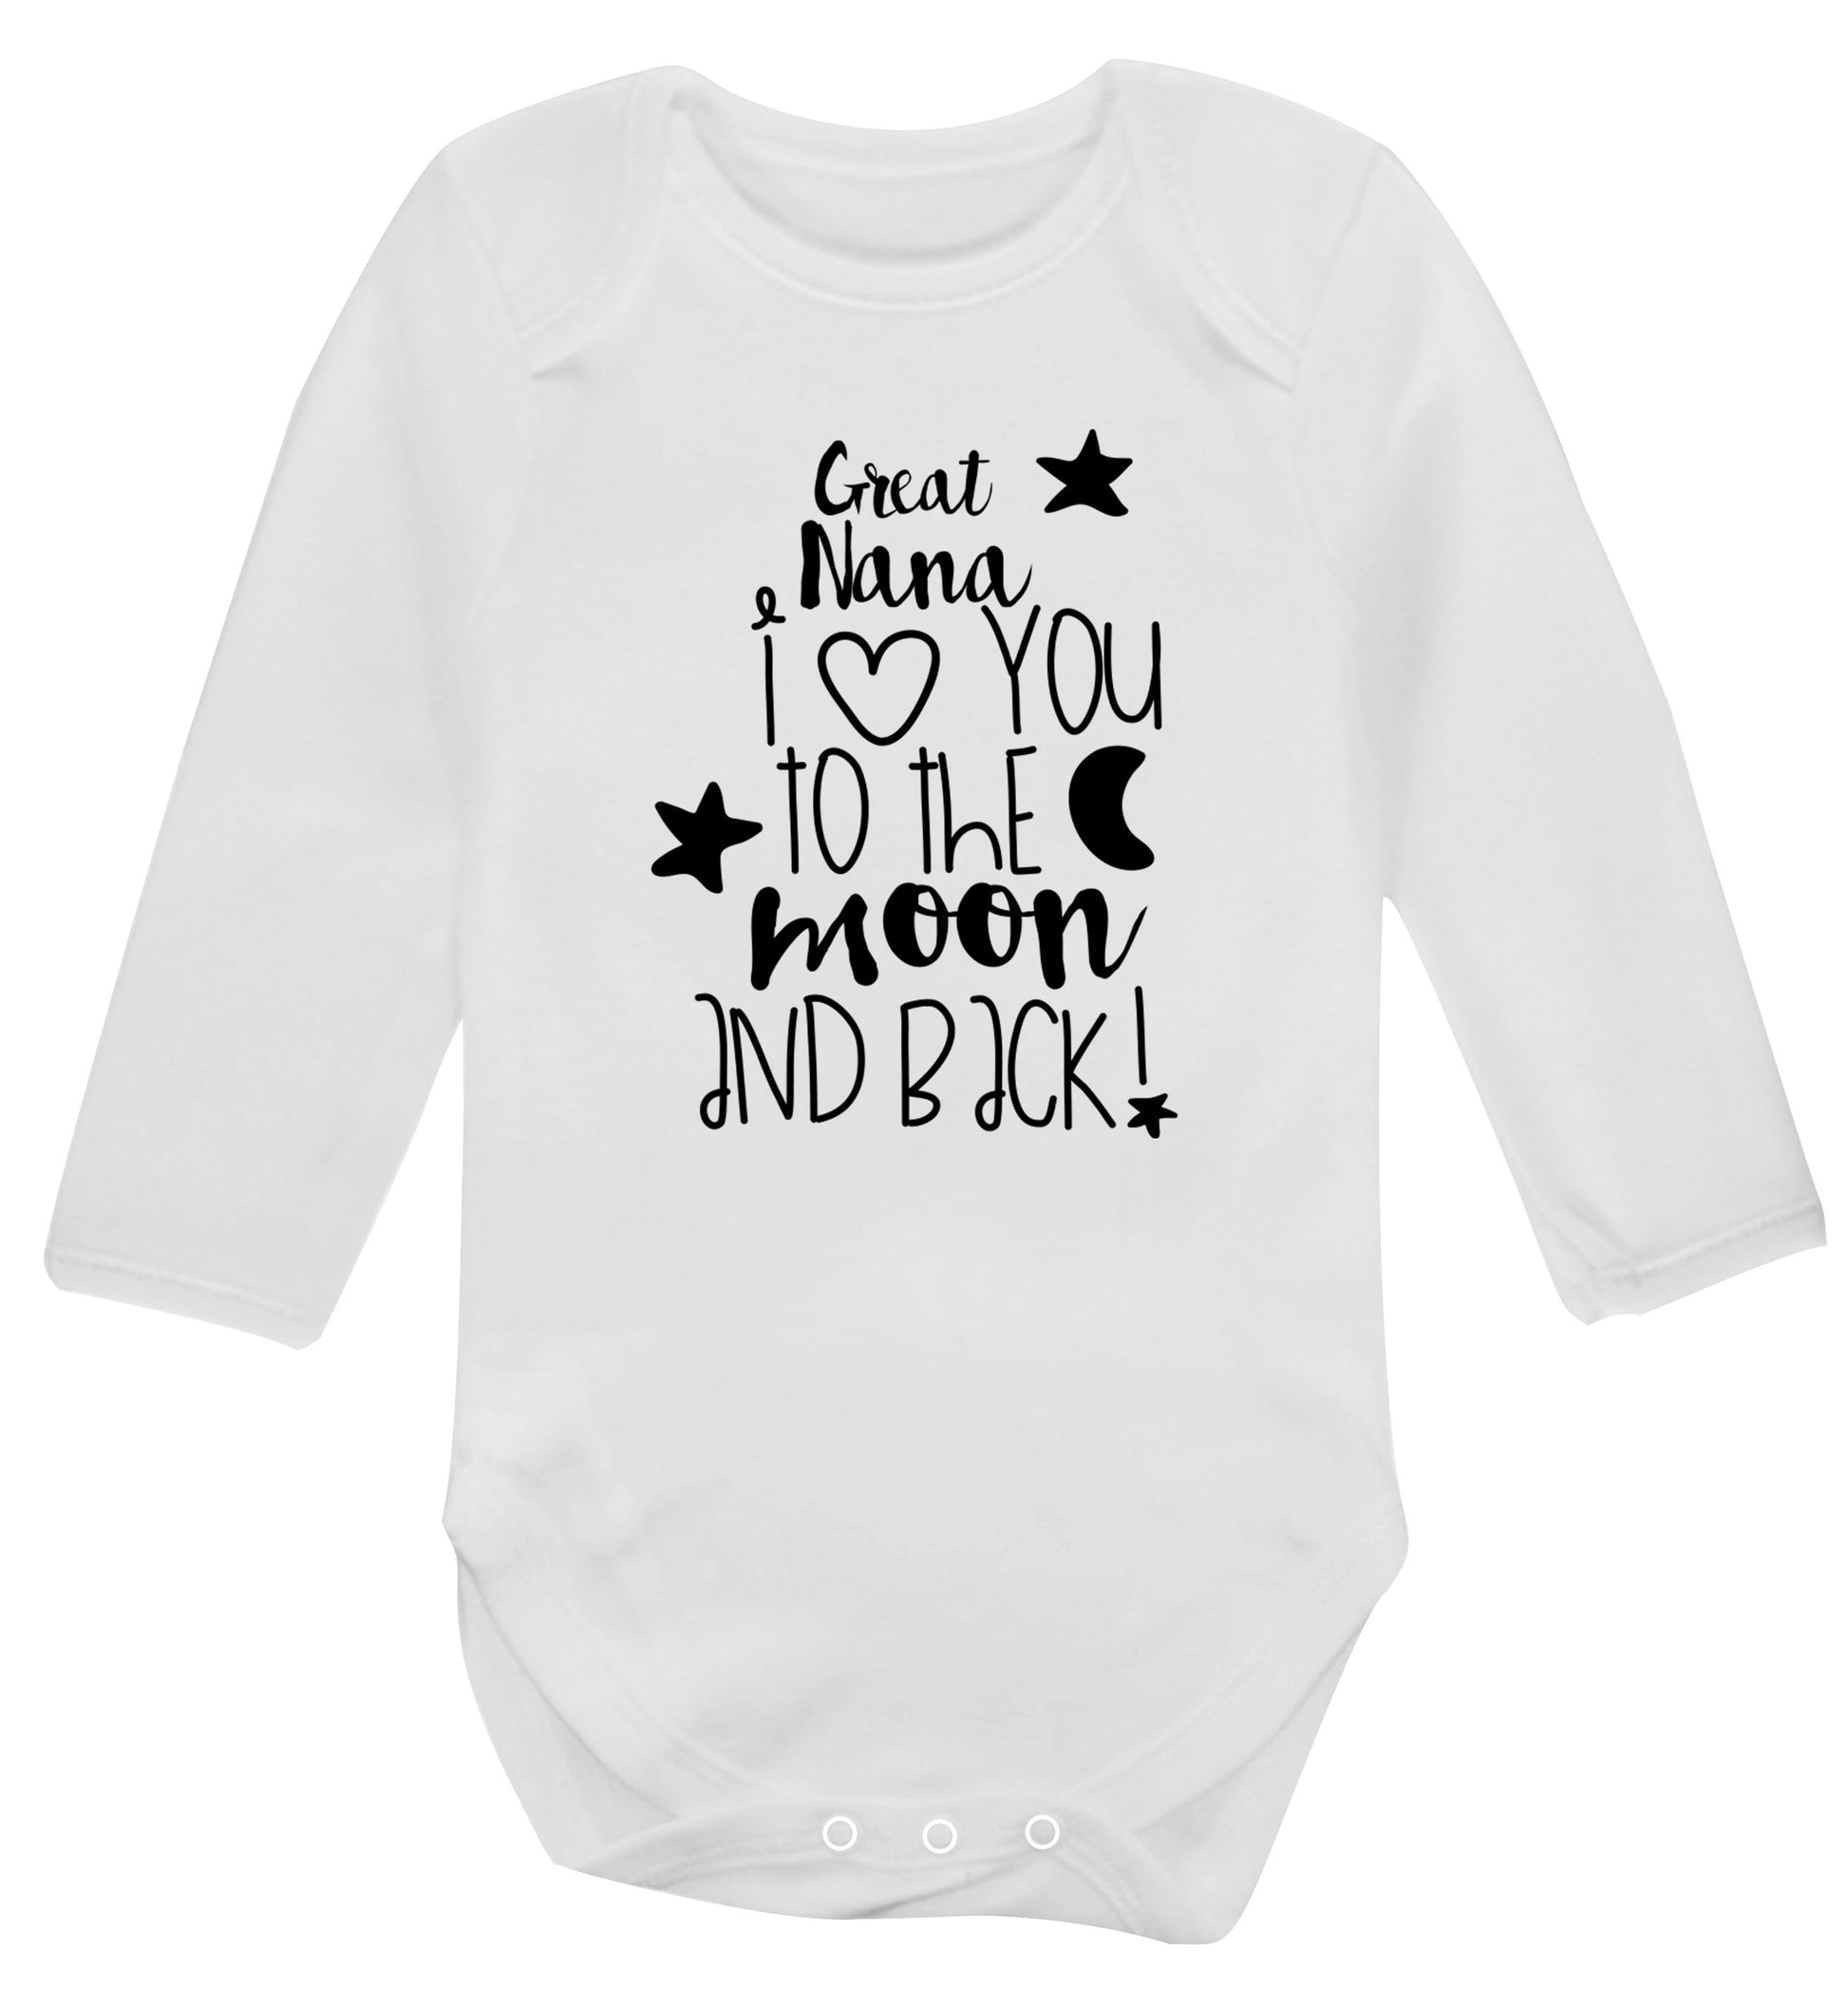 Great Nana I love you to the moon and back Baby Vest long sleeved white 6-12 months